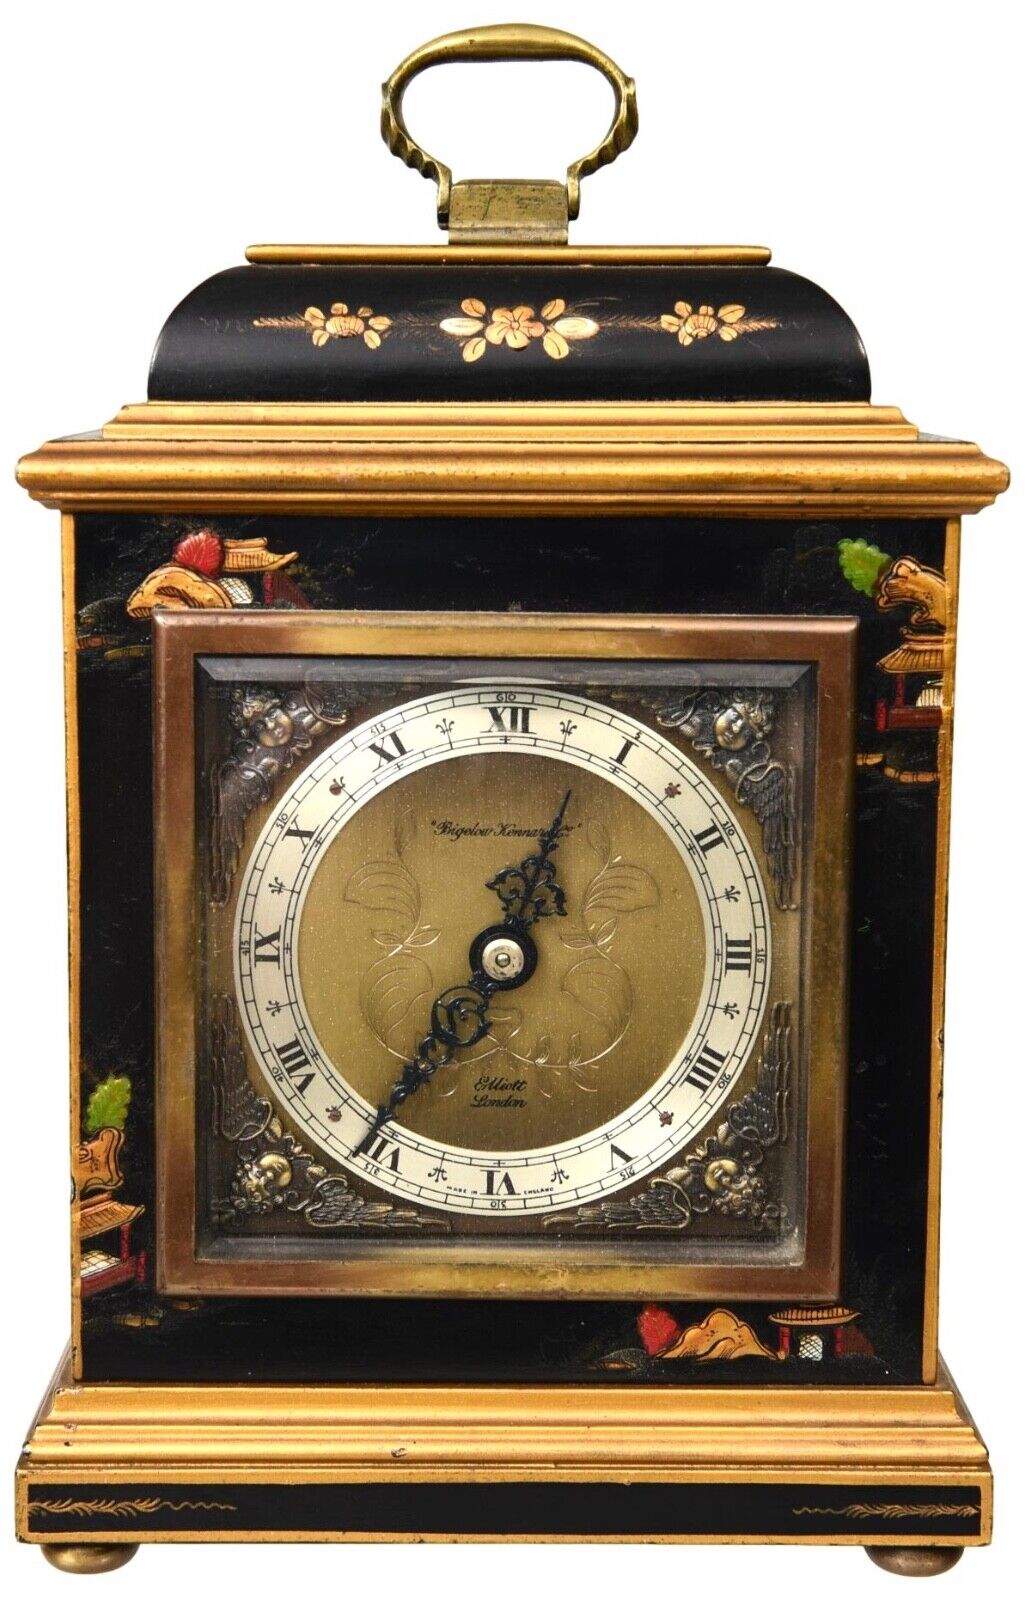 Elliot English 8 Day Table Clock with Japanese Motif c. 1960s